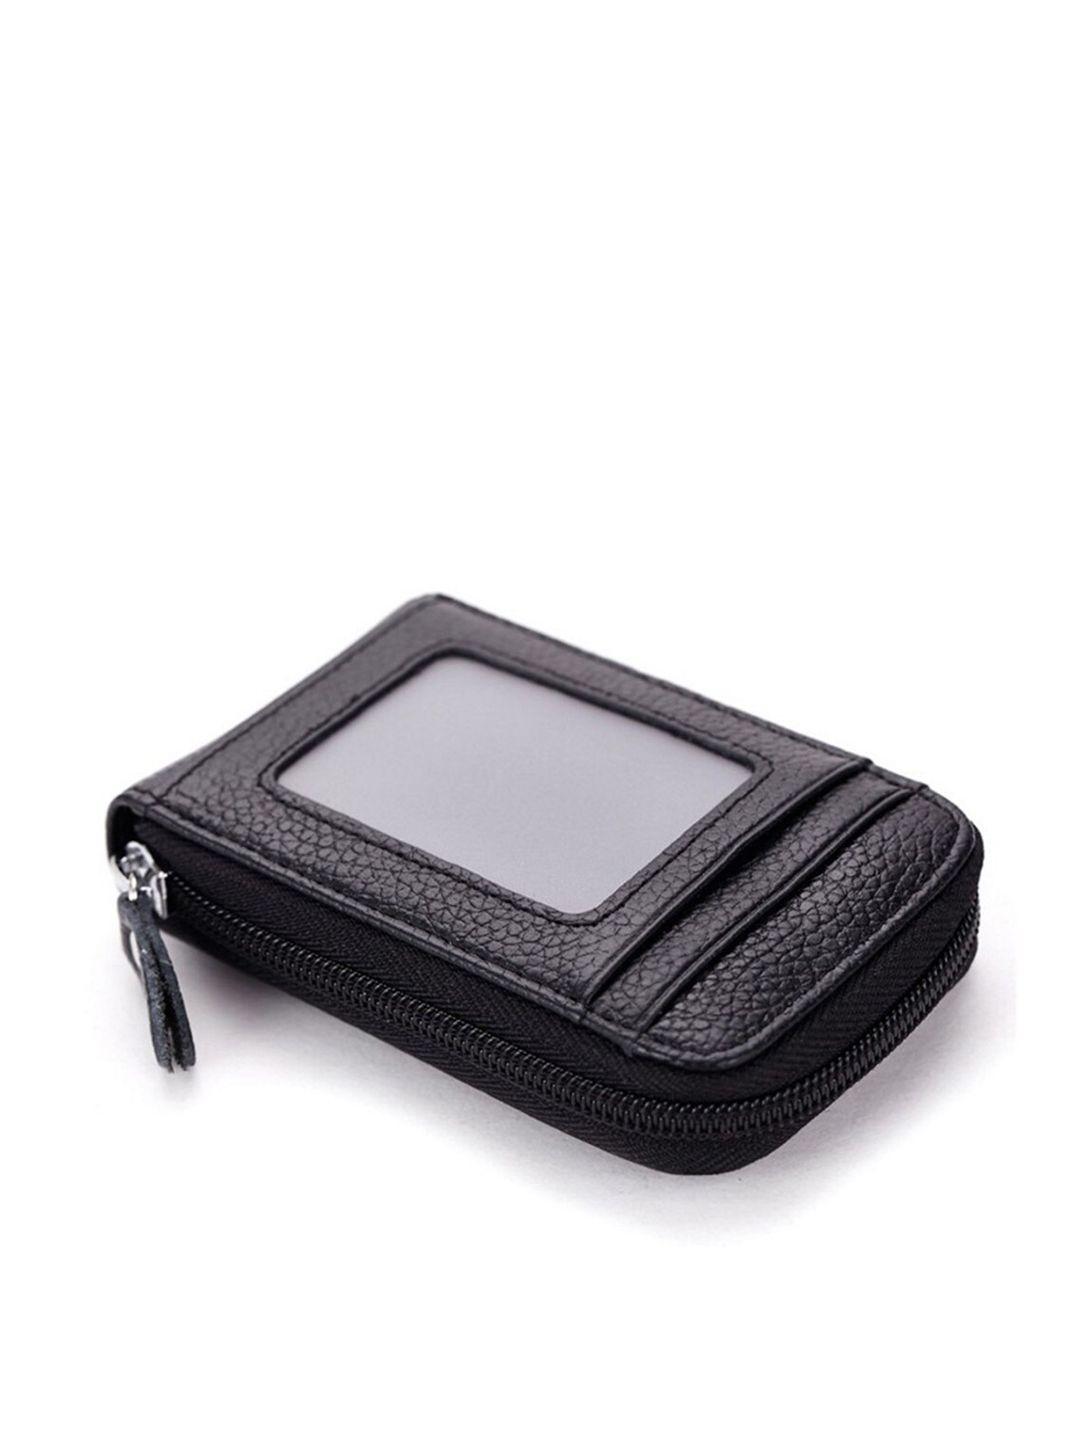 contacts unisex black leather card holder